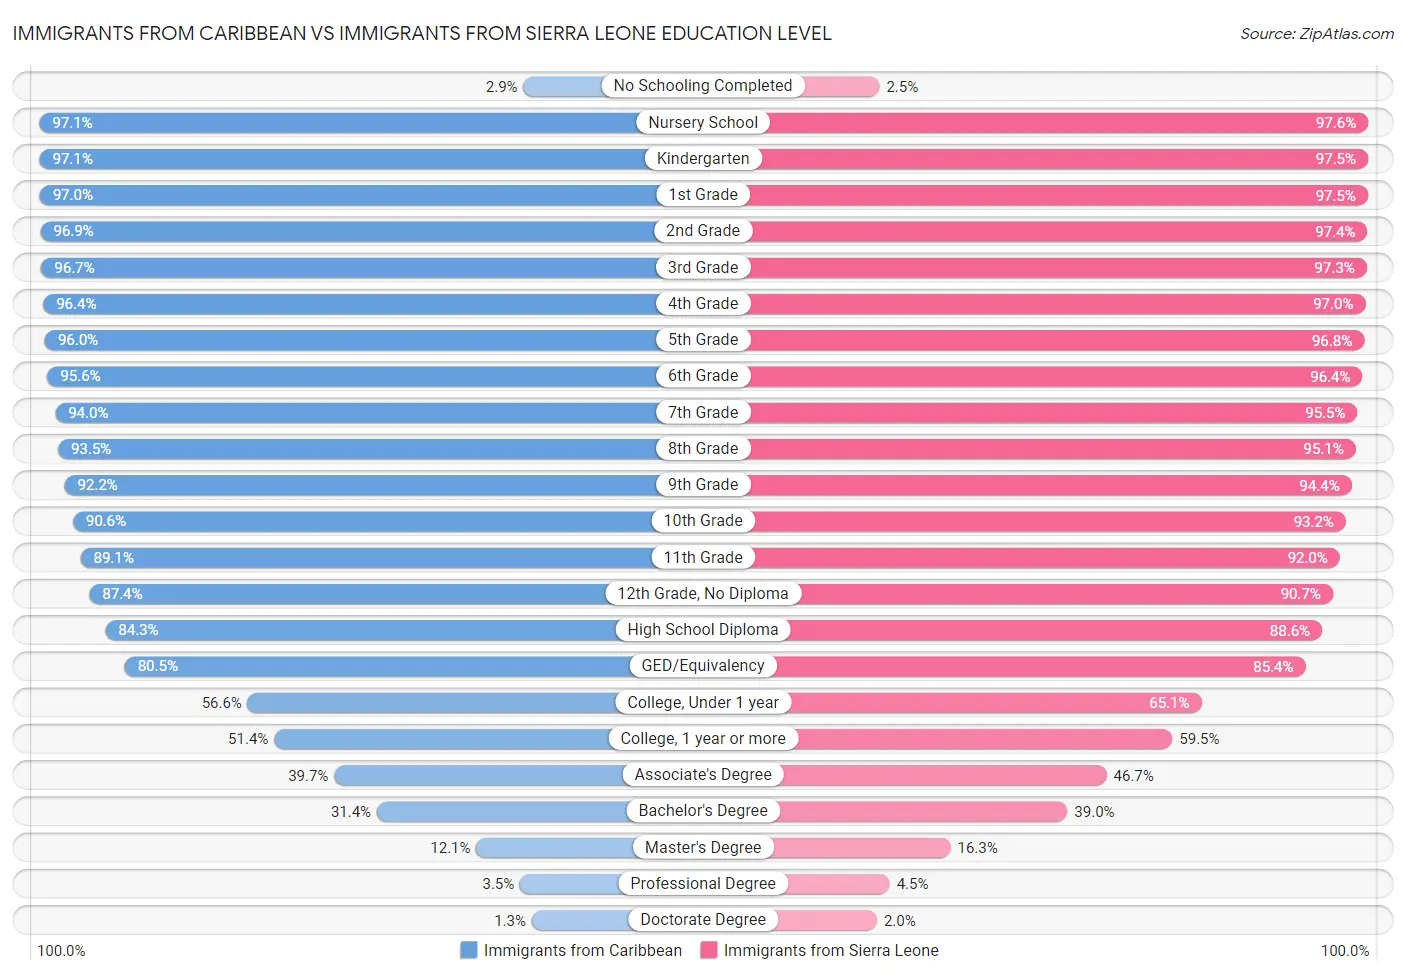 Immigrants from Caribbean vs Immigrants from Sierra Leone Education Level